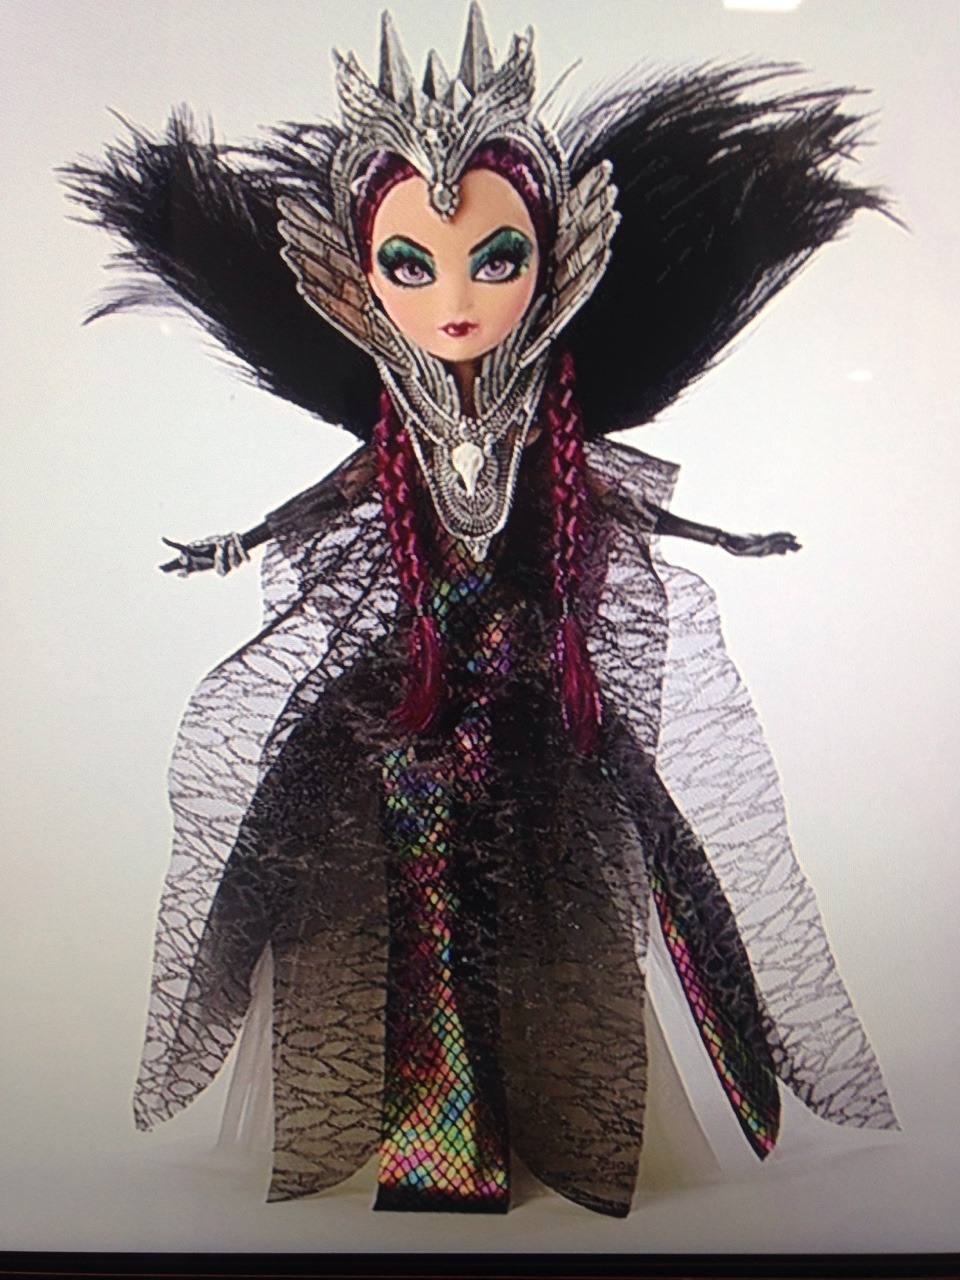 teatime-with-maddie:

everaftermonsters:

Evil Raven with a different dress, this is what was advertised as her while in line to by Mattel stuff at sdcc

Huh, is this like the prototype of her or something? Interesting!